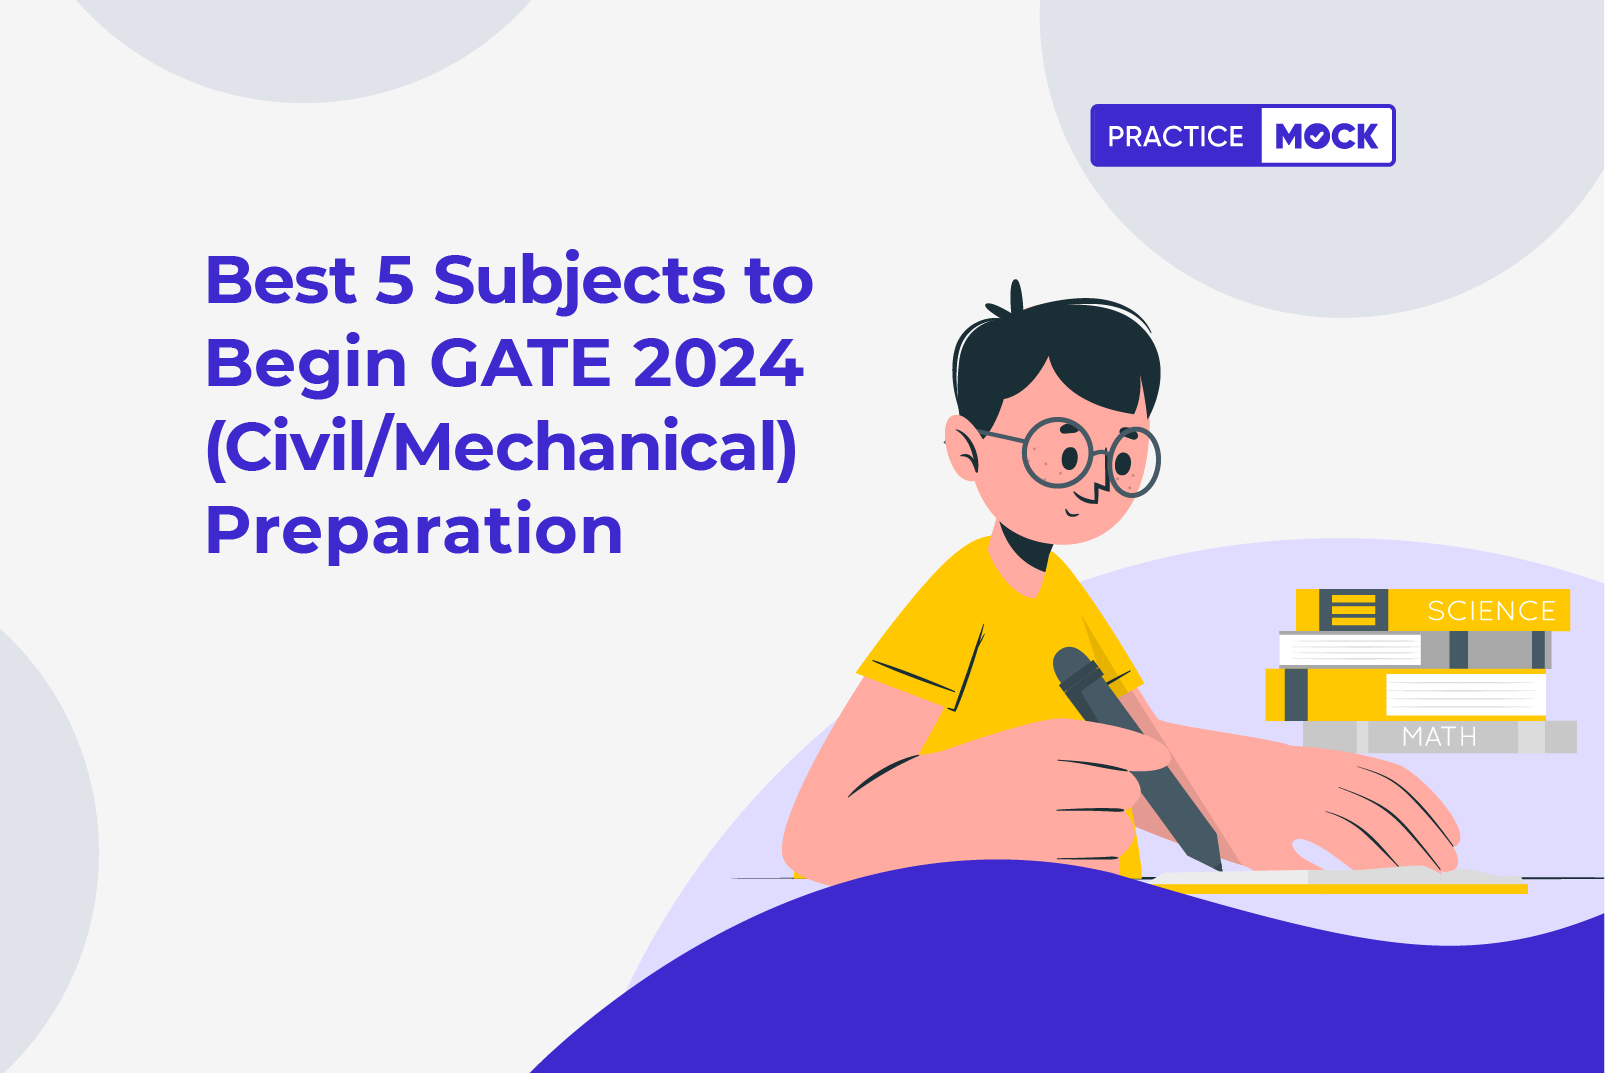 Best 5 Subjects to Begin GATE 2024 Preparation for Civil and Mechanical Engineers